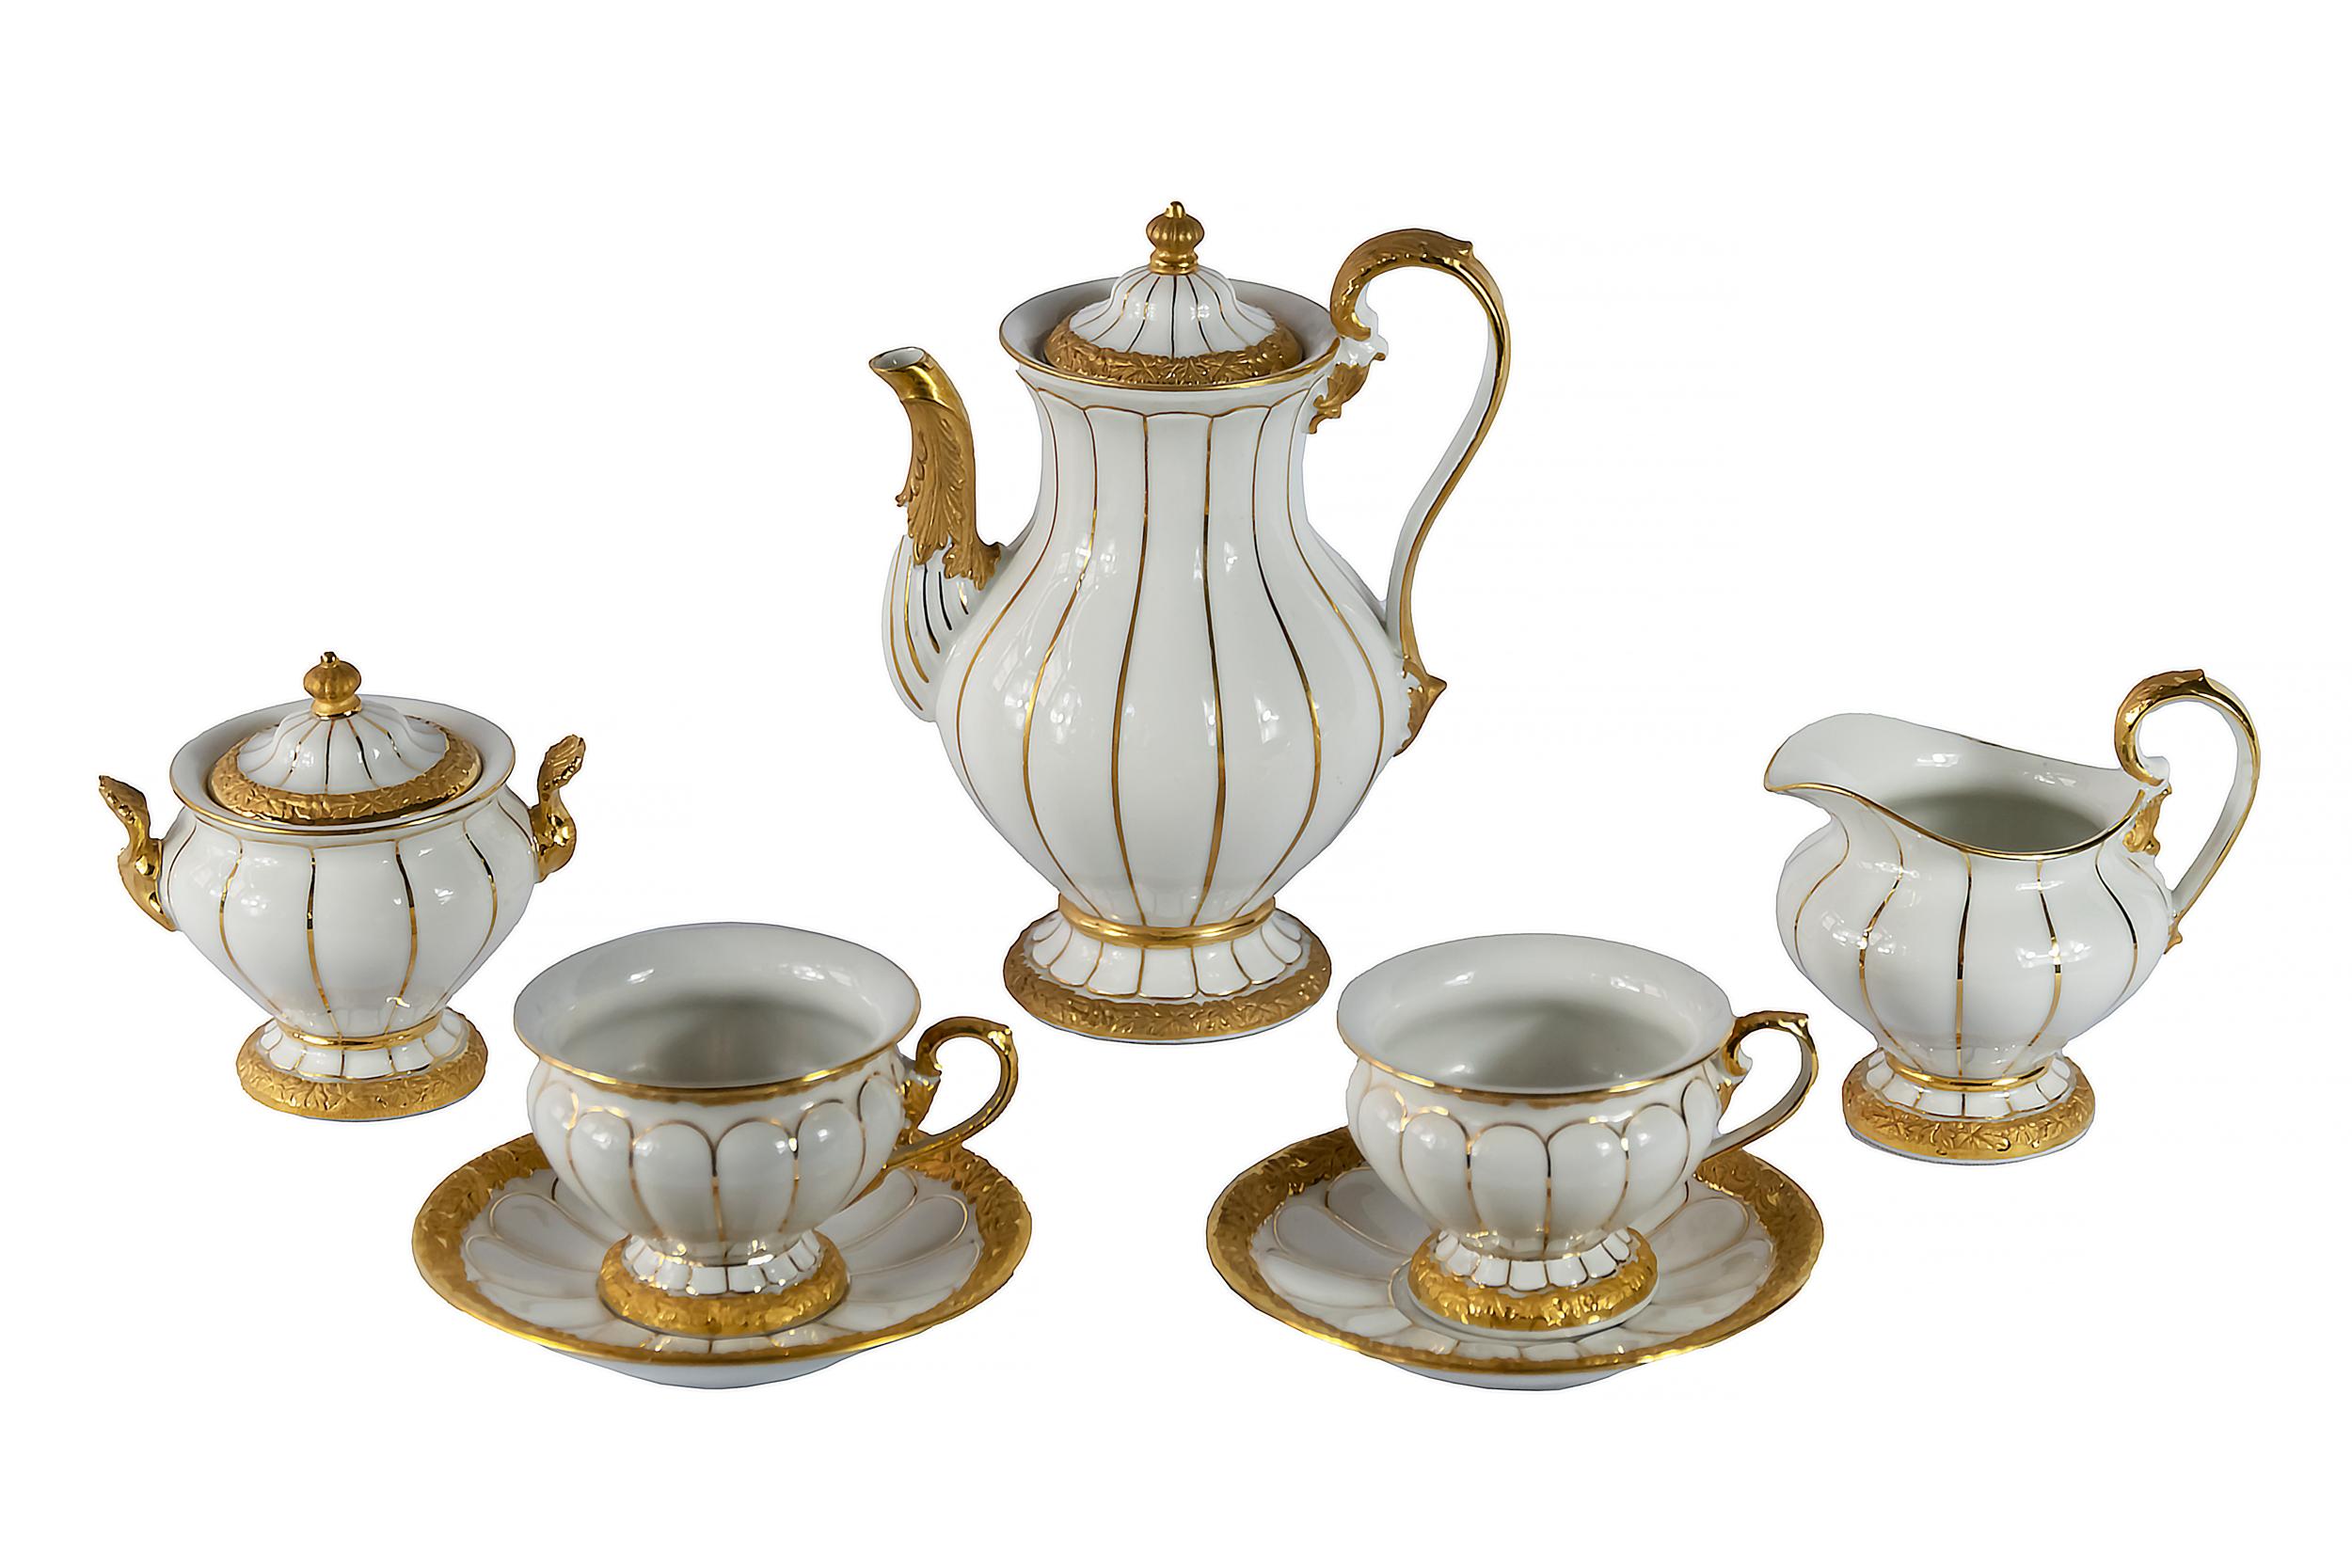 German Meissen porcelain coffee set for 2 persons.
Including coffee pot, milk jug, sugar bowl and 2 cups with saucers.
Porcelain is hand painted with rich gold decor.
Dimensions: coffee pot: H 17.5 x 13 x 10 cm, coffee cup H 5.7 x 9.5 x7.8